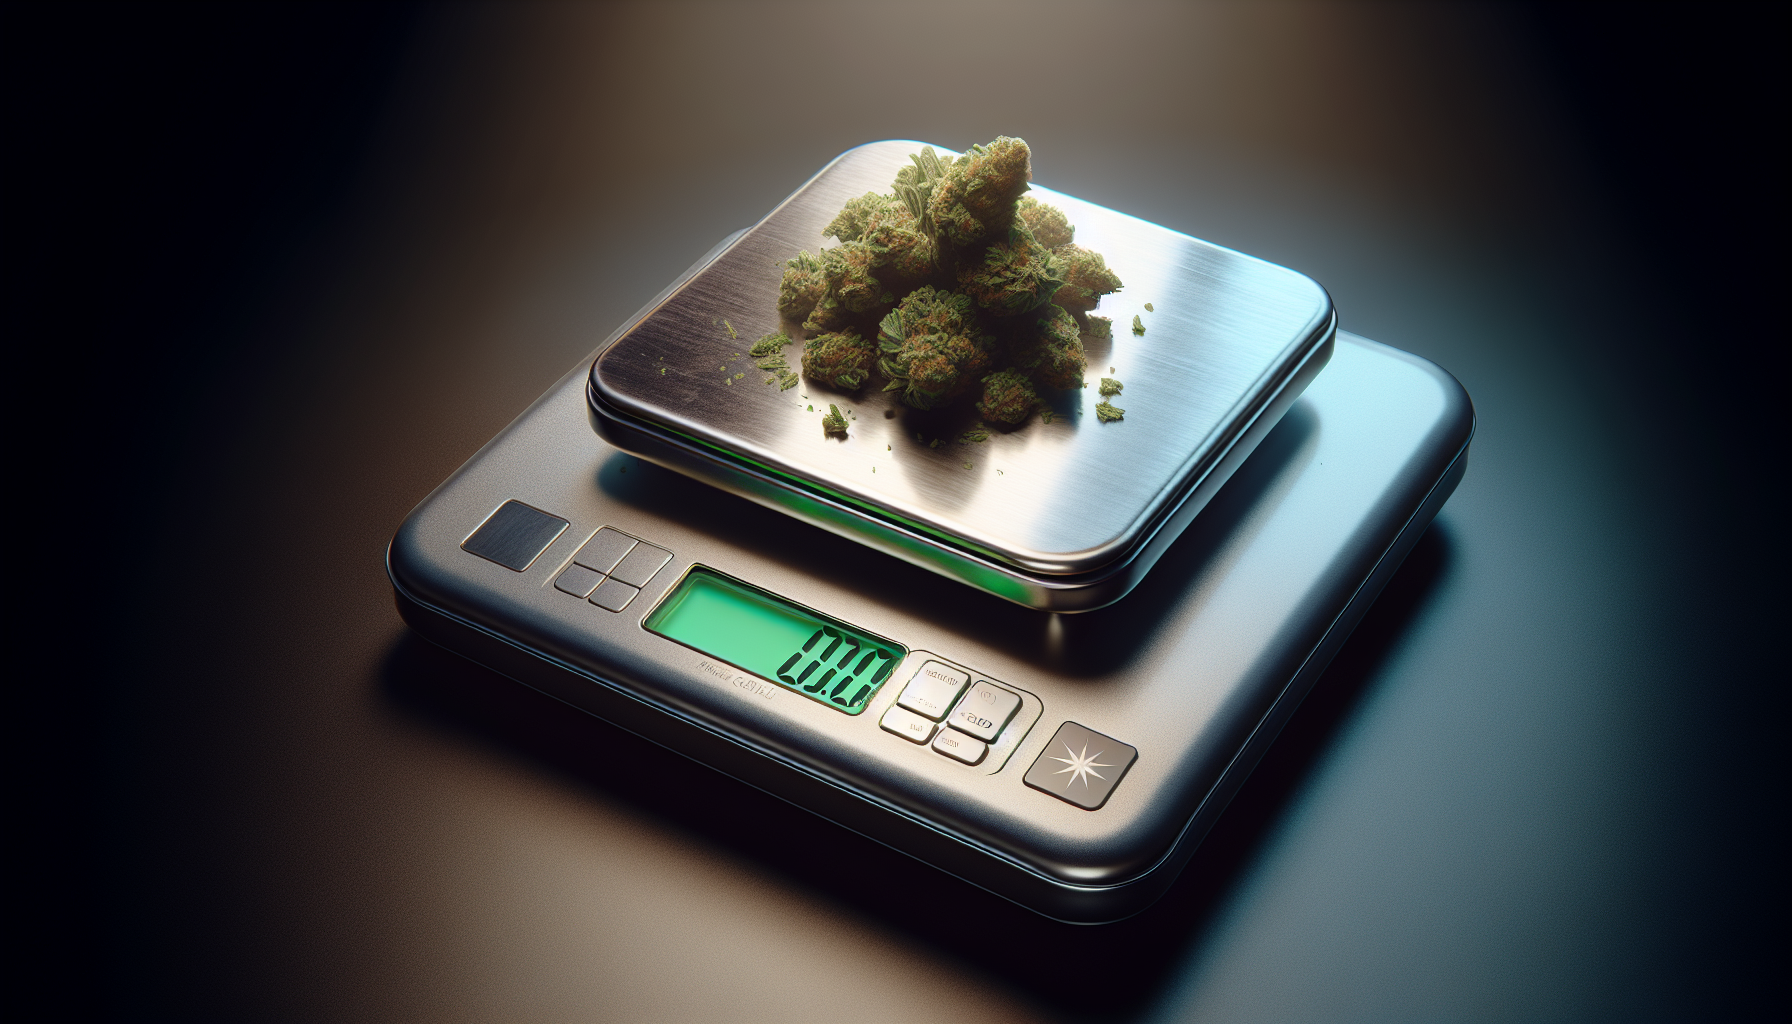 Digital scale for measuring cannabis